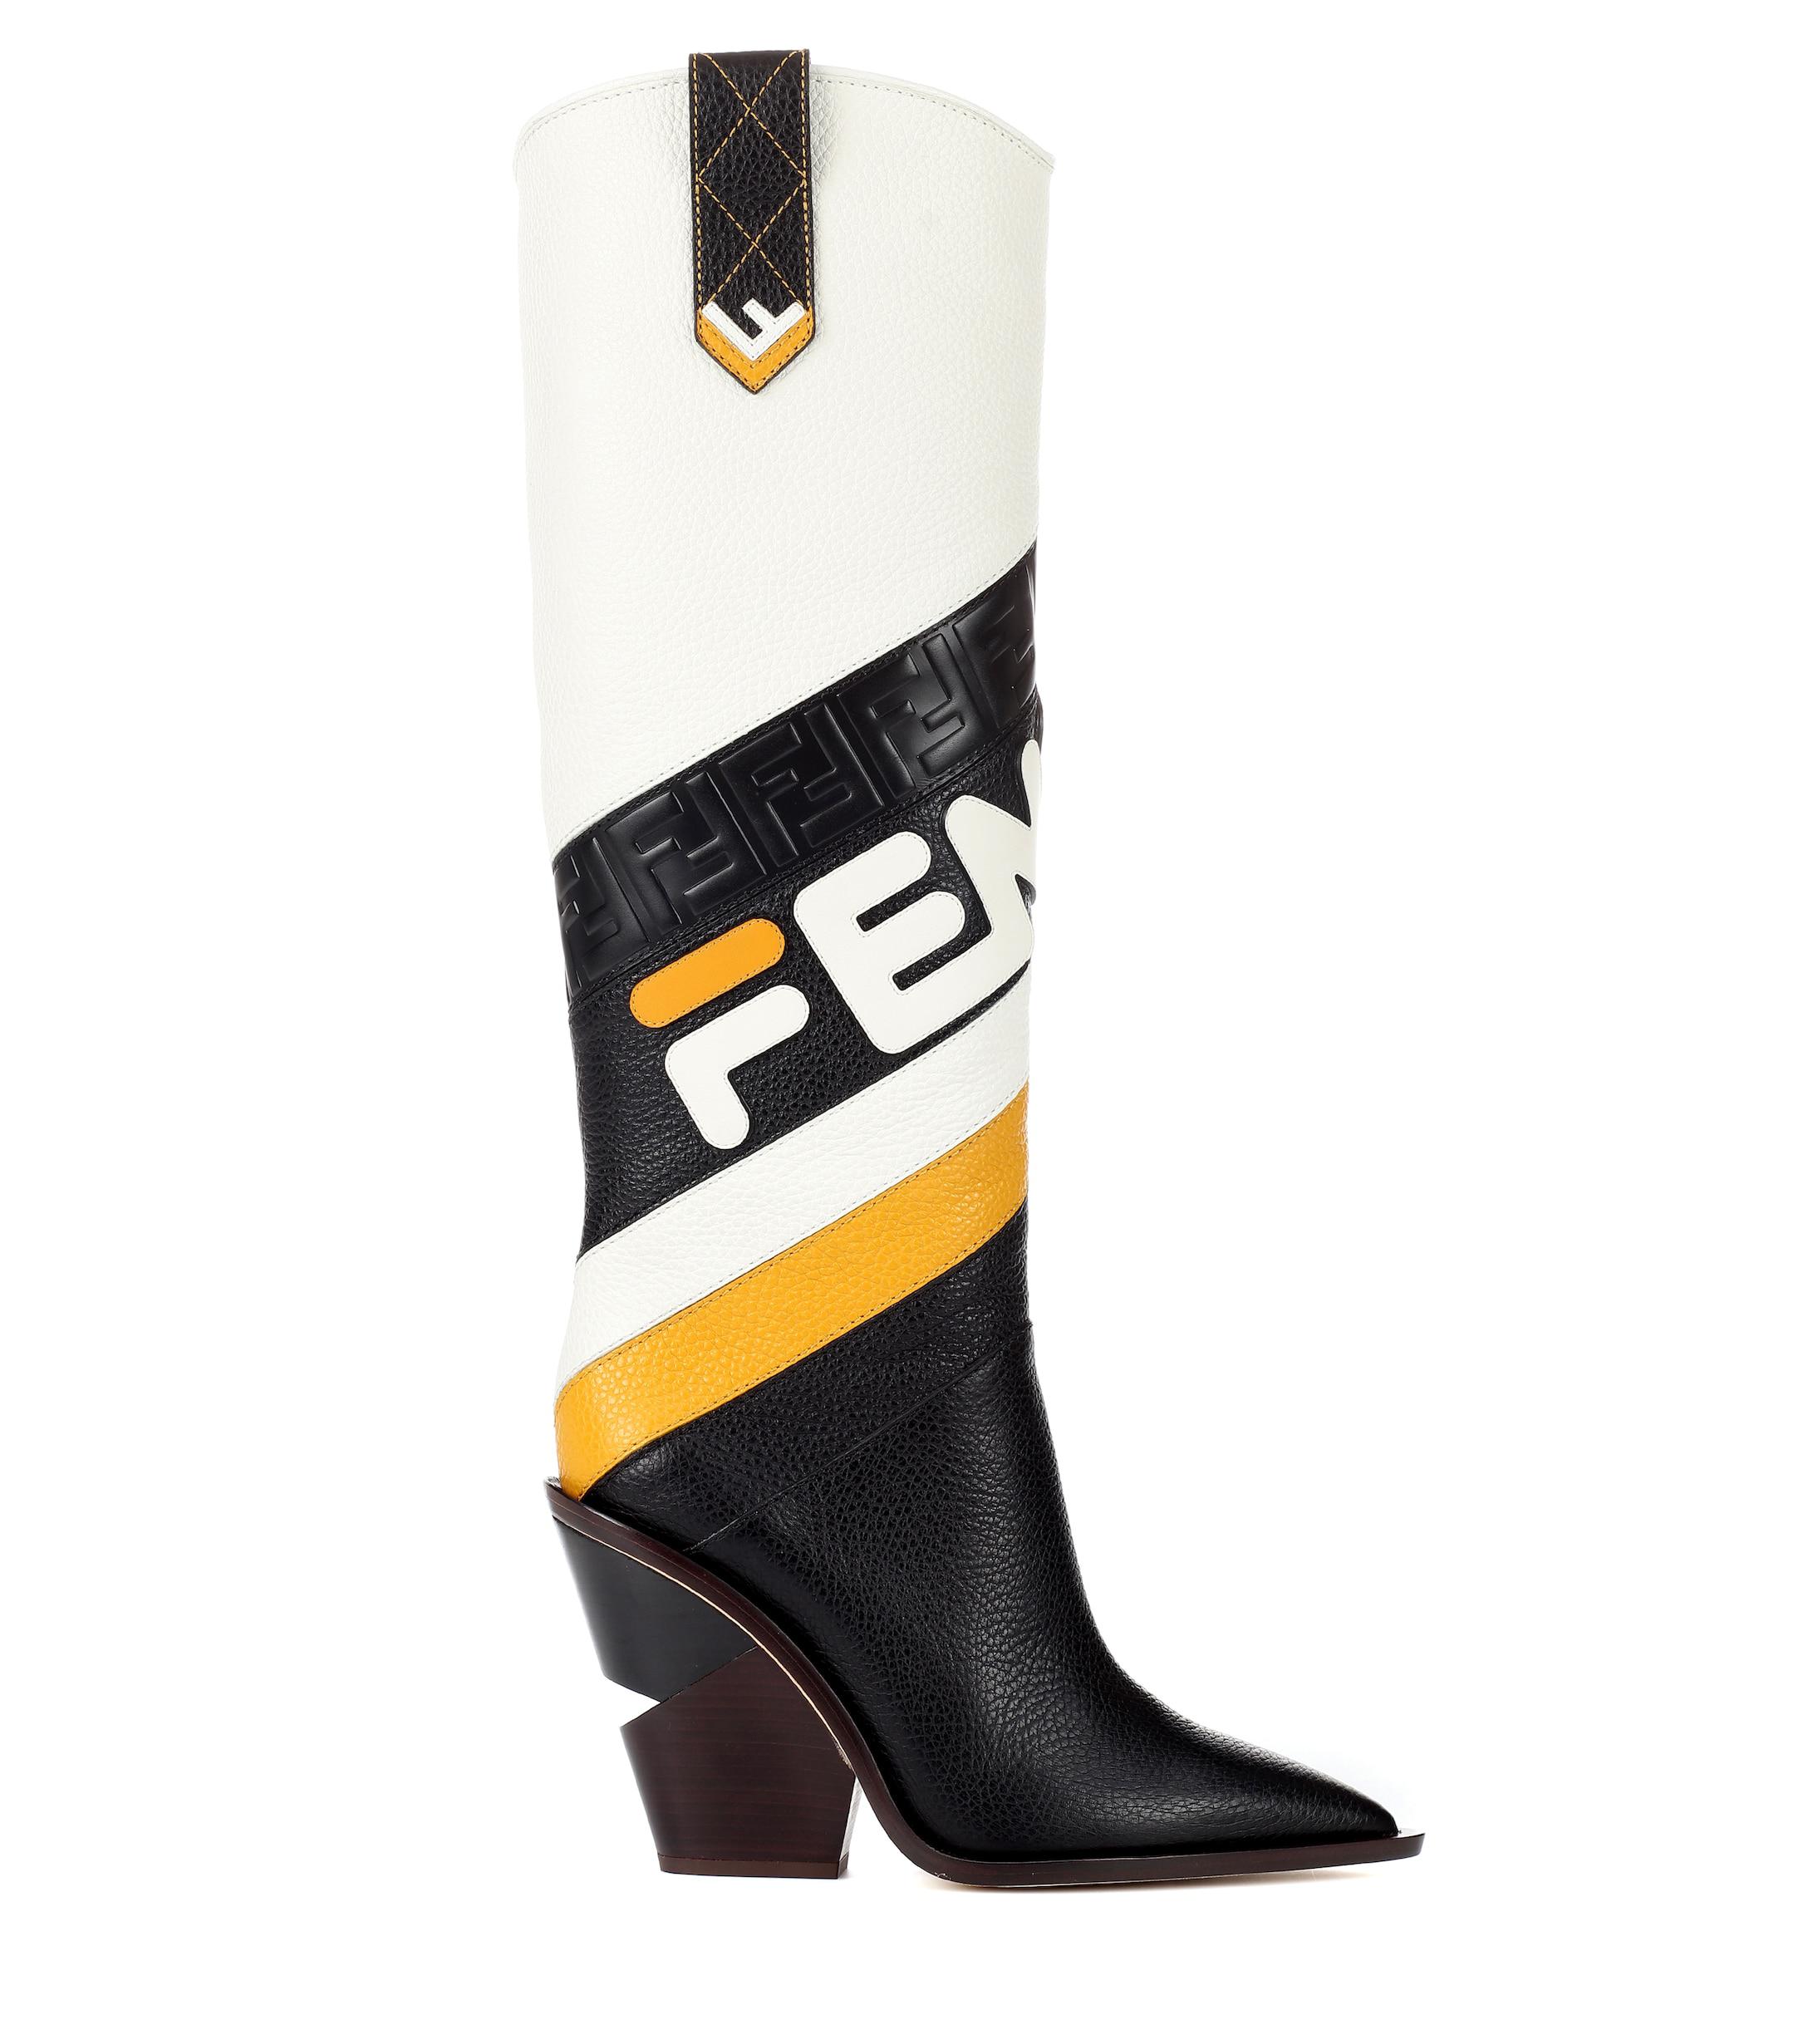 Fendi Mania Leather Knee High Boots in 